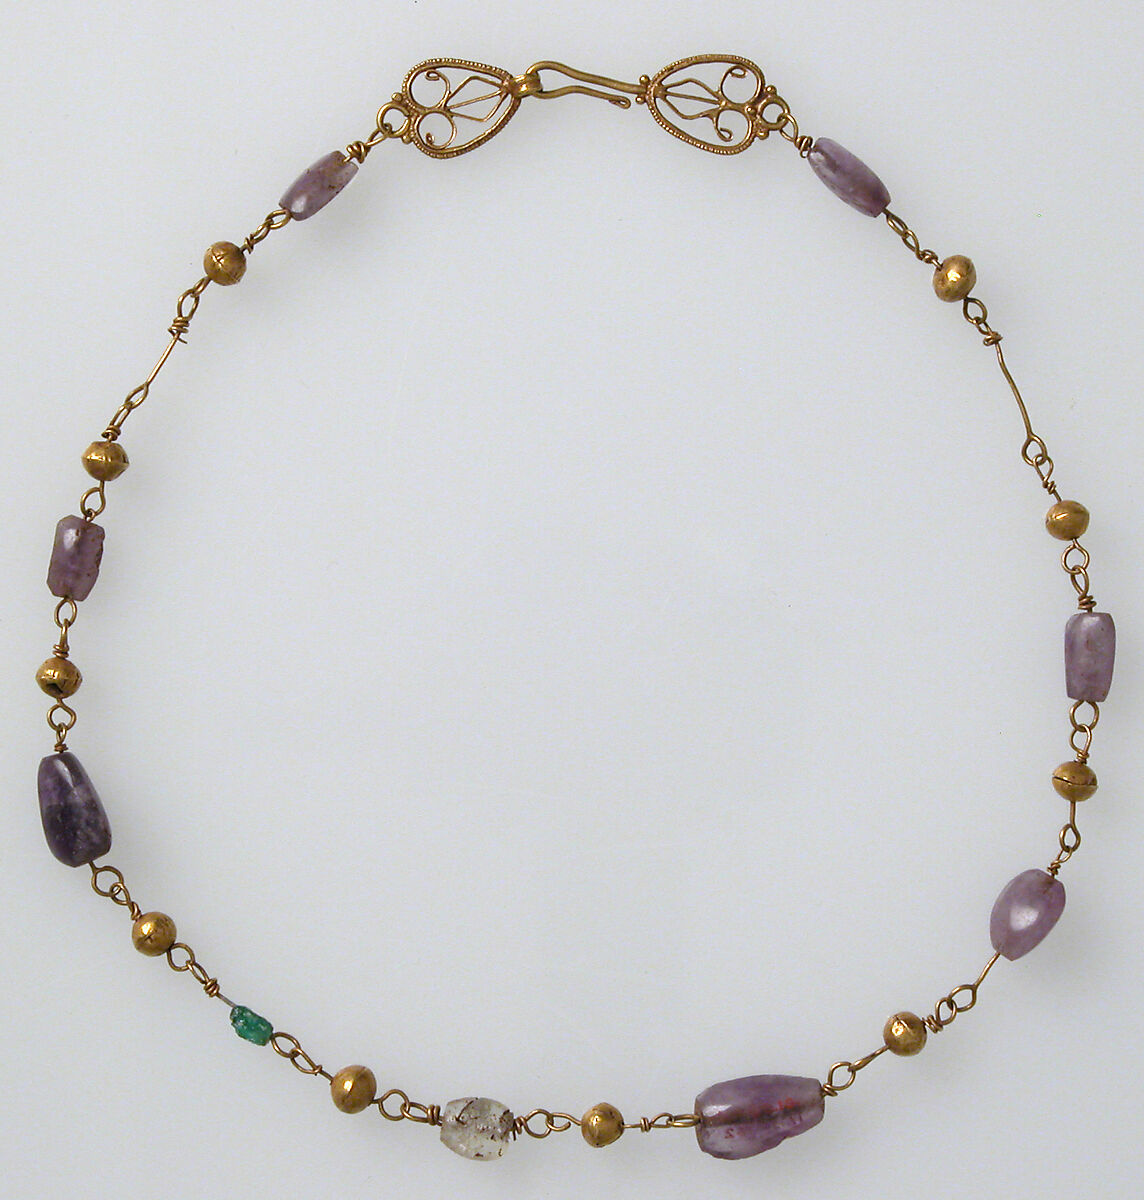 Gold Necklace with Amethysts, Glass, and Gold Beads, Gold, amethyst, (colored glass or rock crystal and emerald) beads, Byzantine 